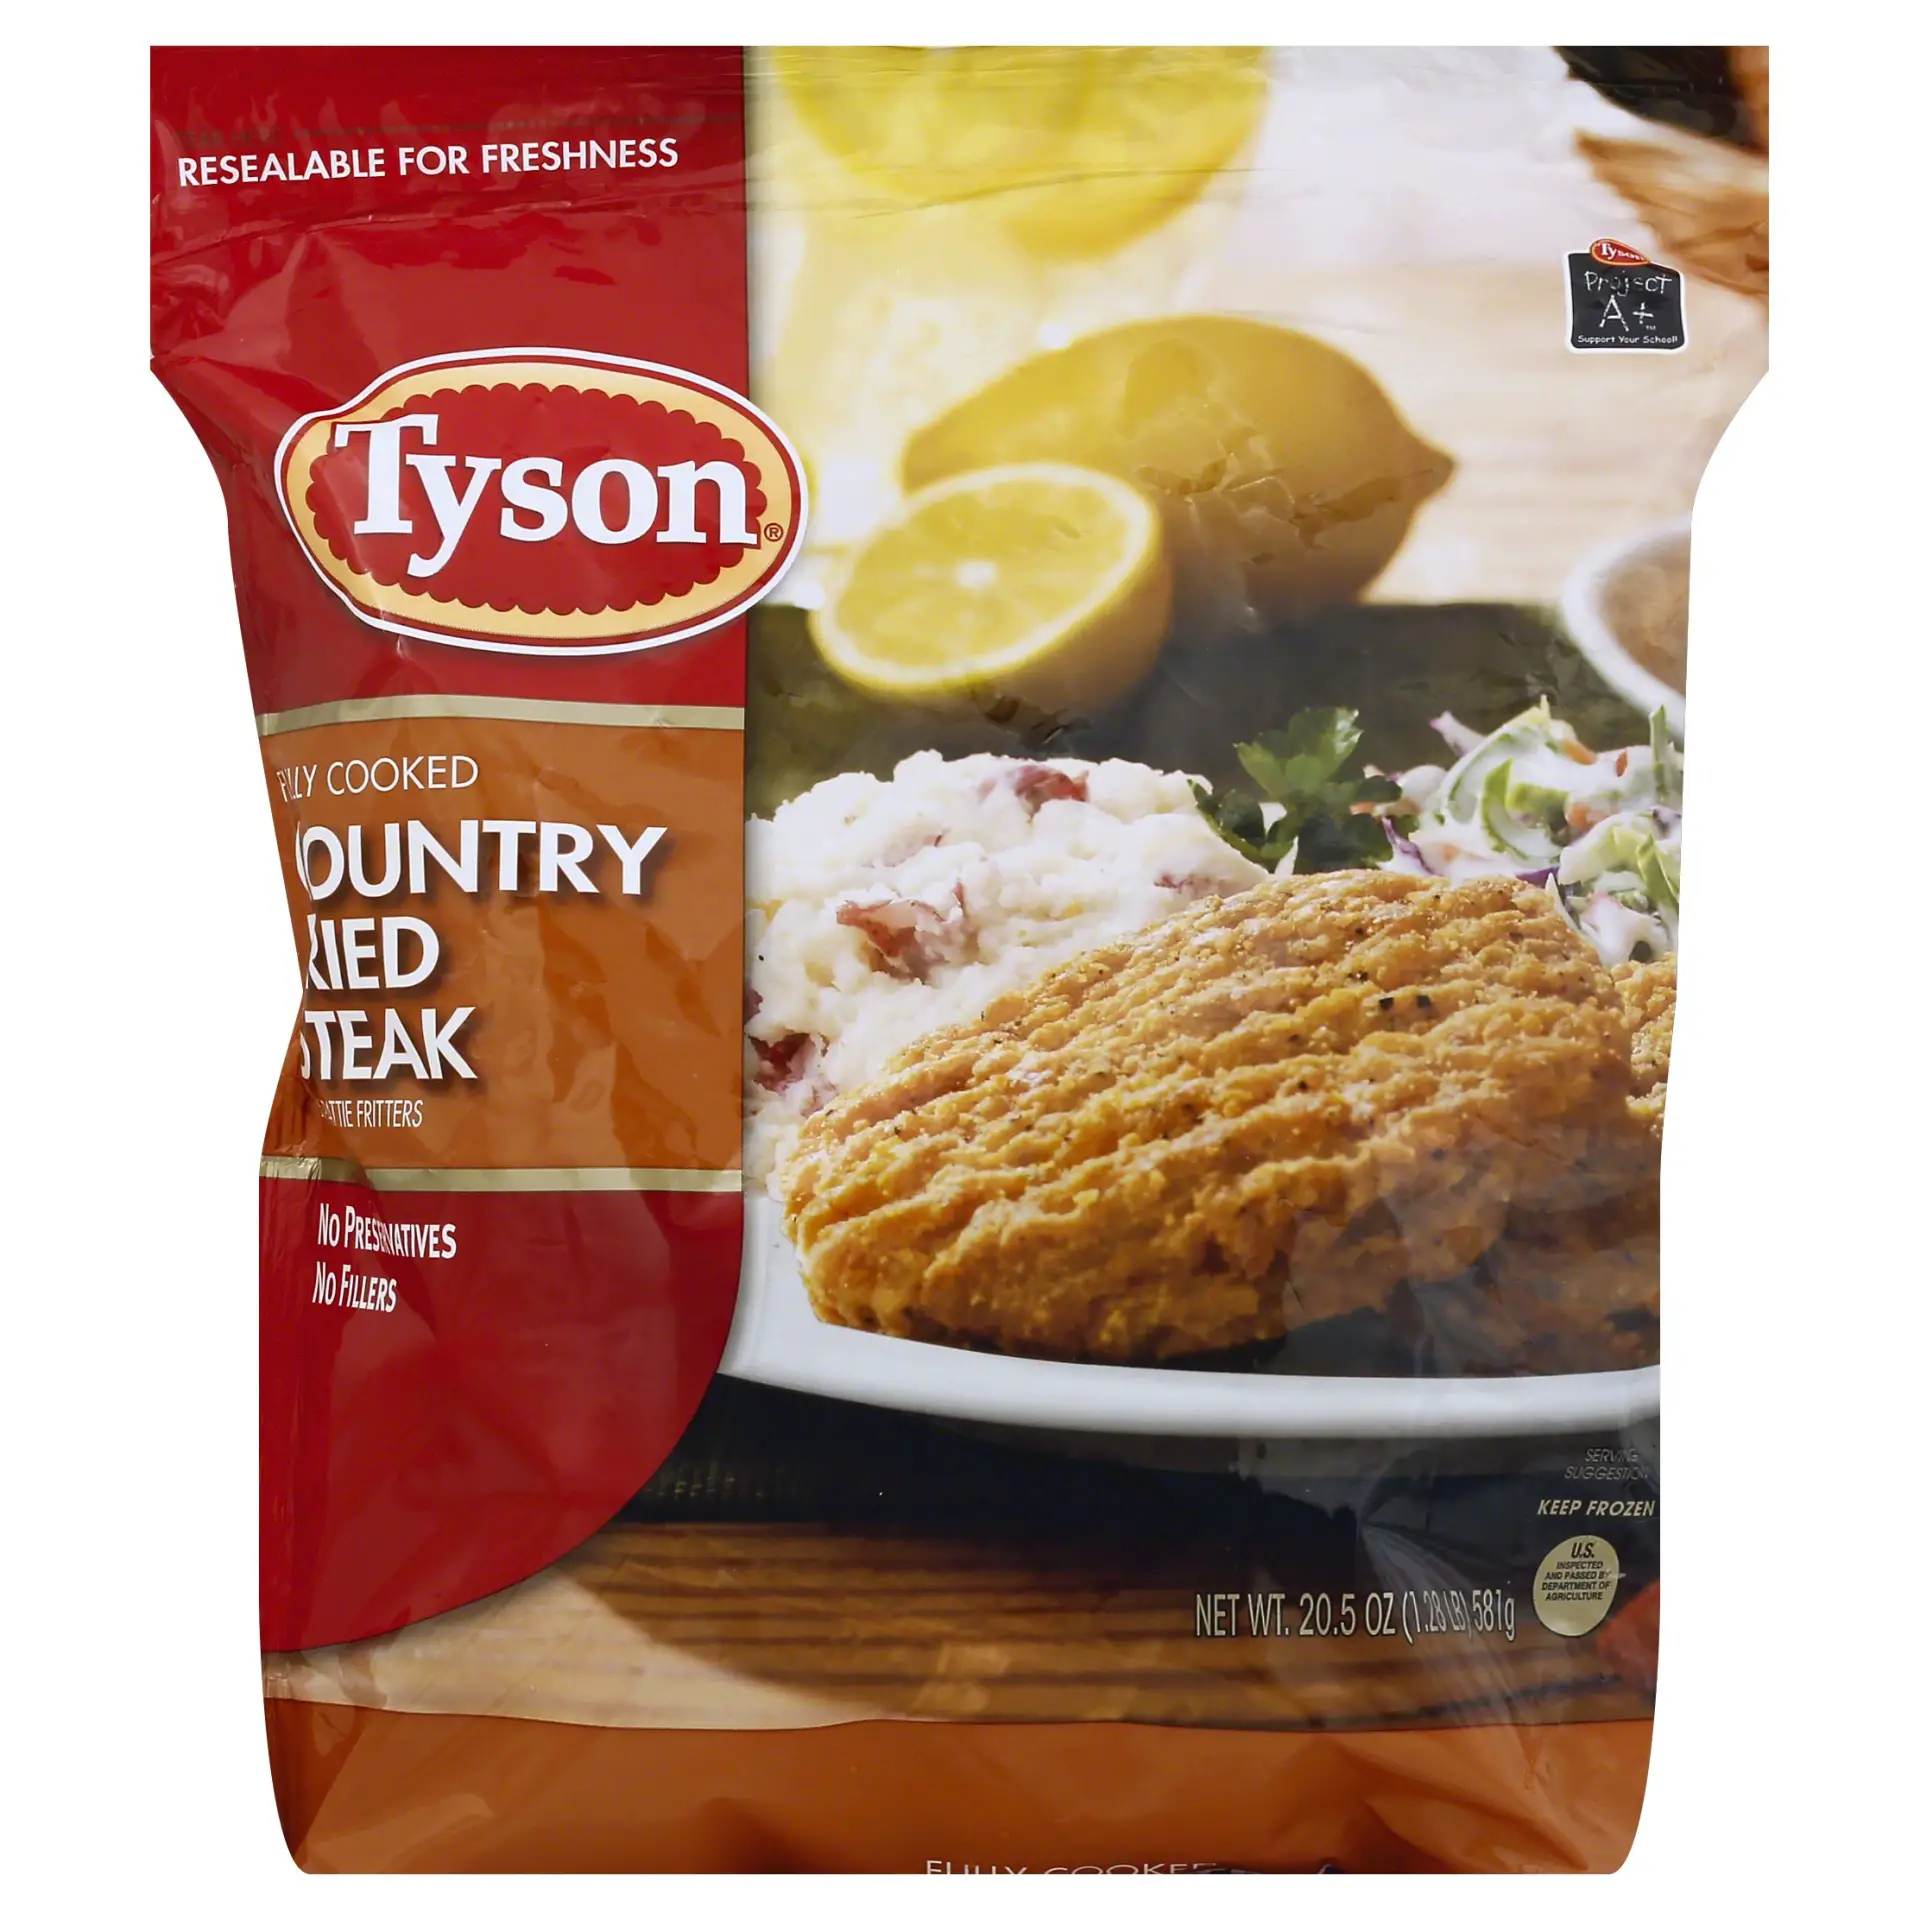 Tyson Fully Cooked Country Fried Steak Patties 20.5 oz